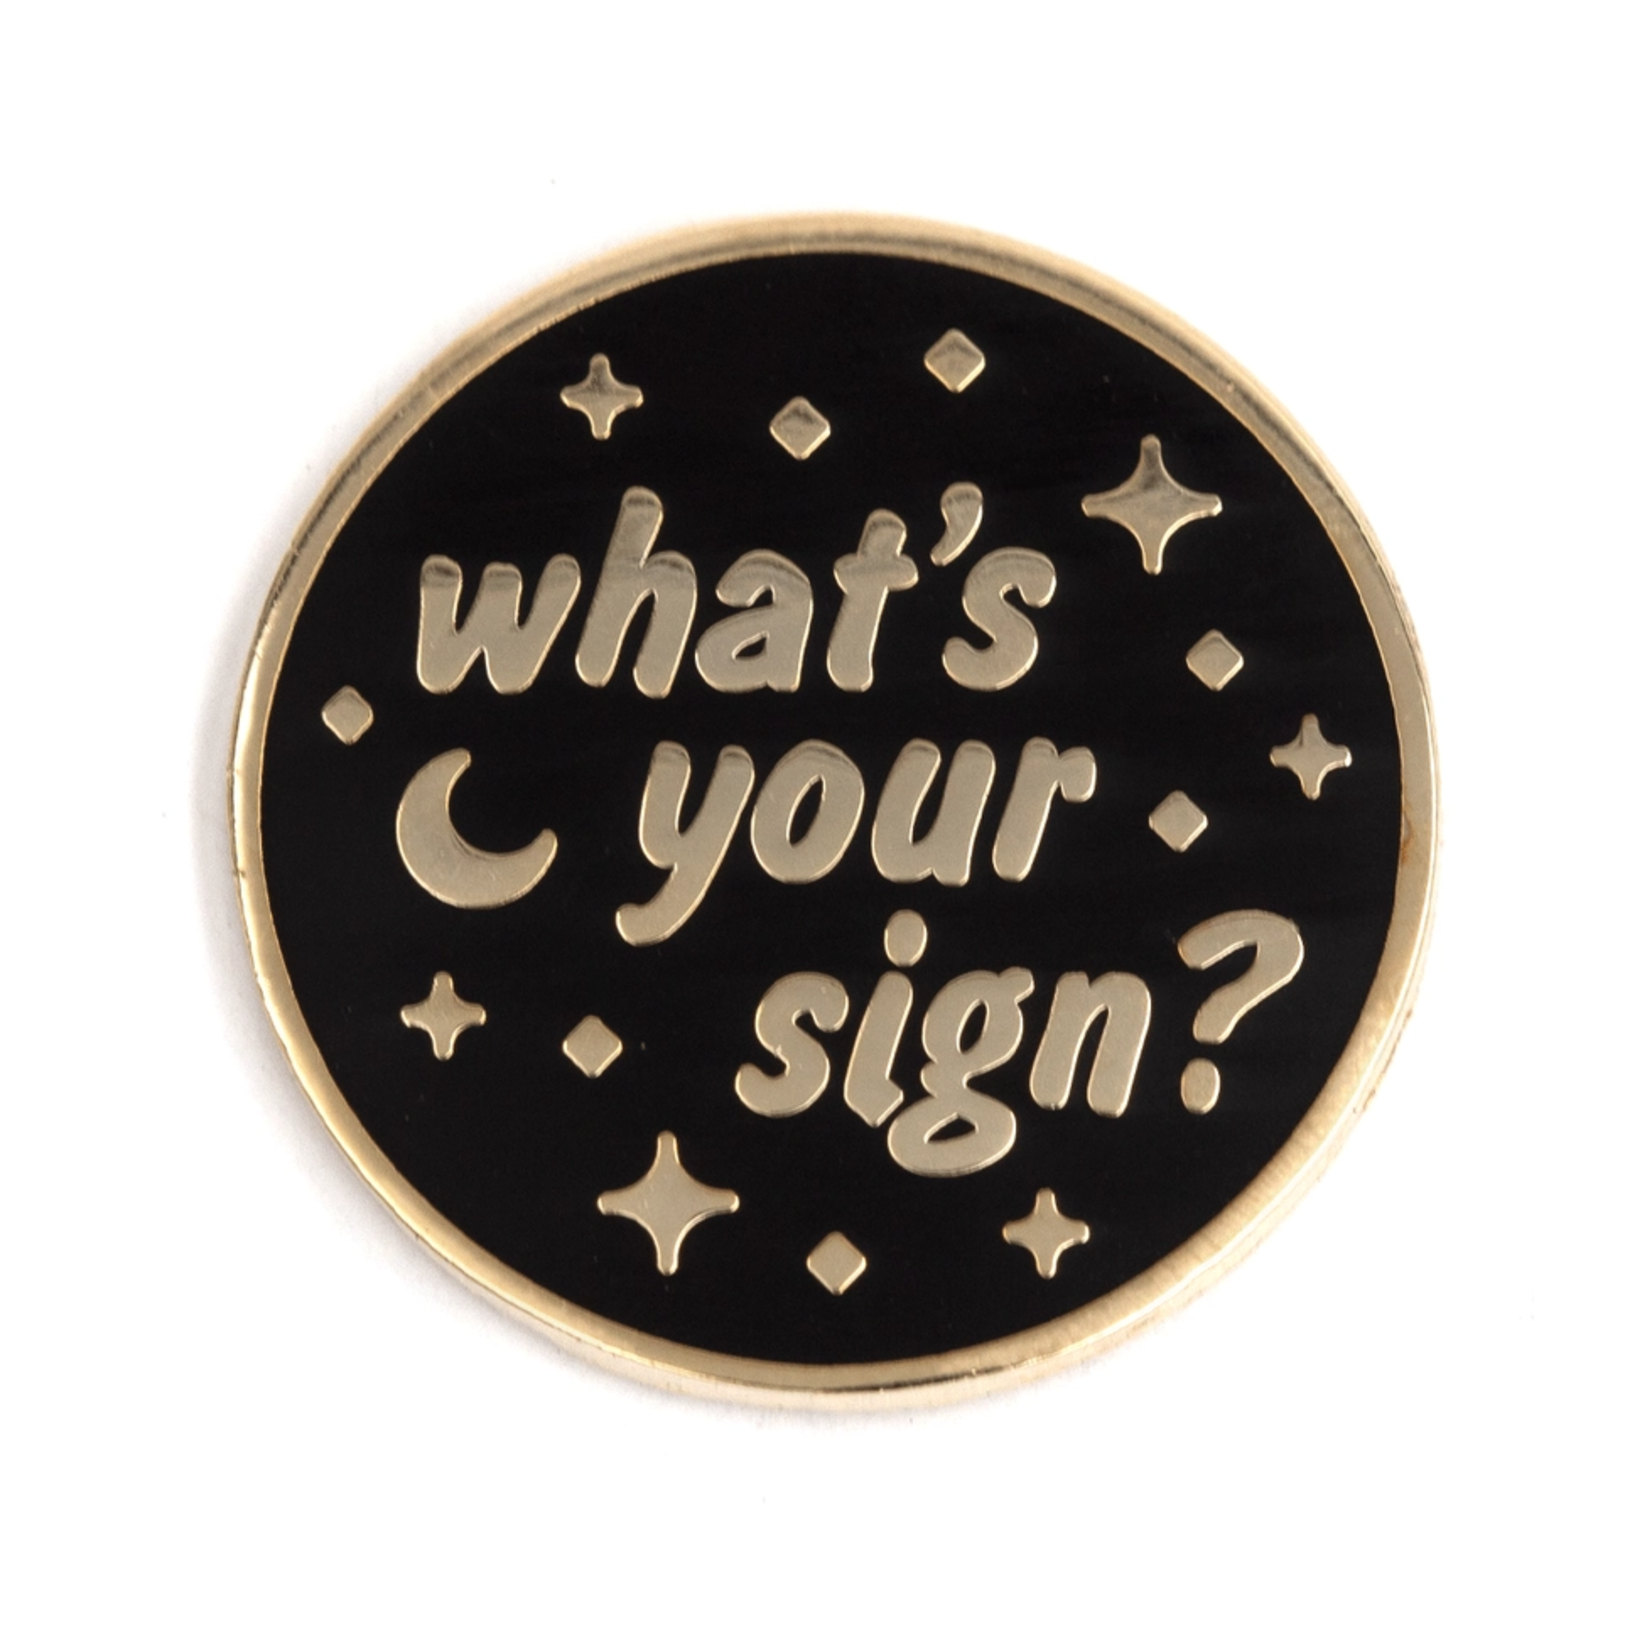 These Are Things What's Your Sign Enamel Pin